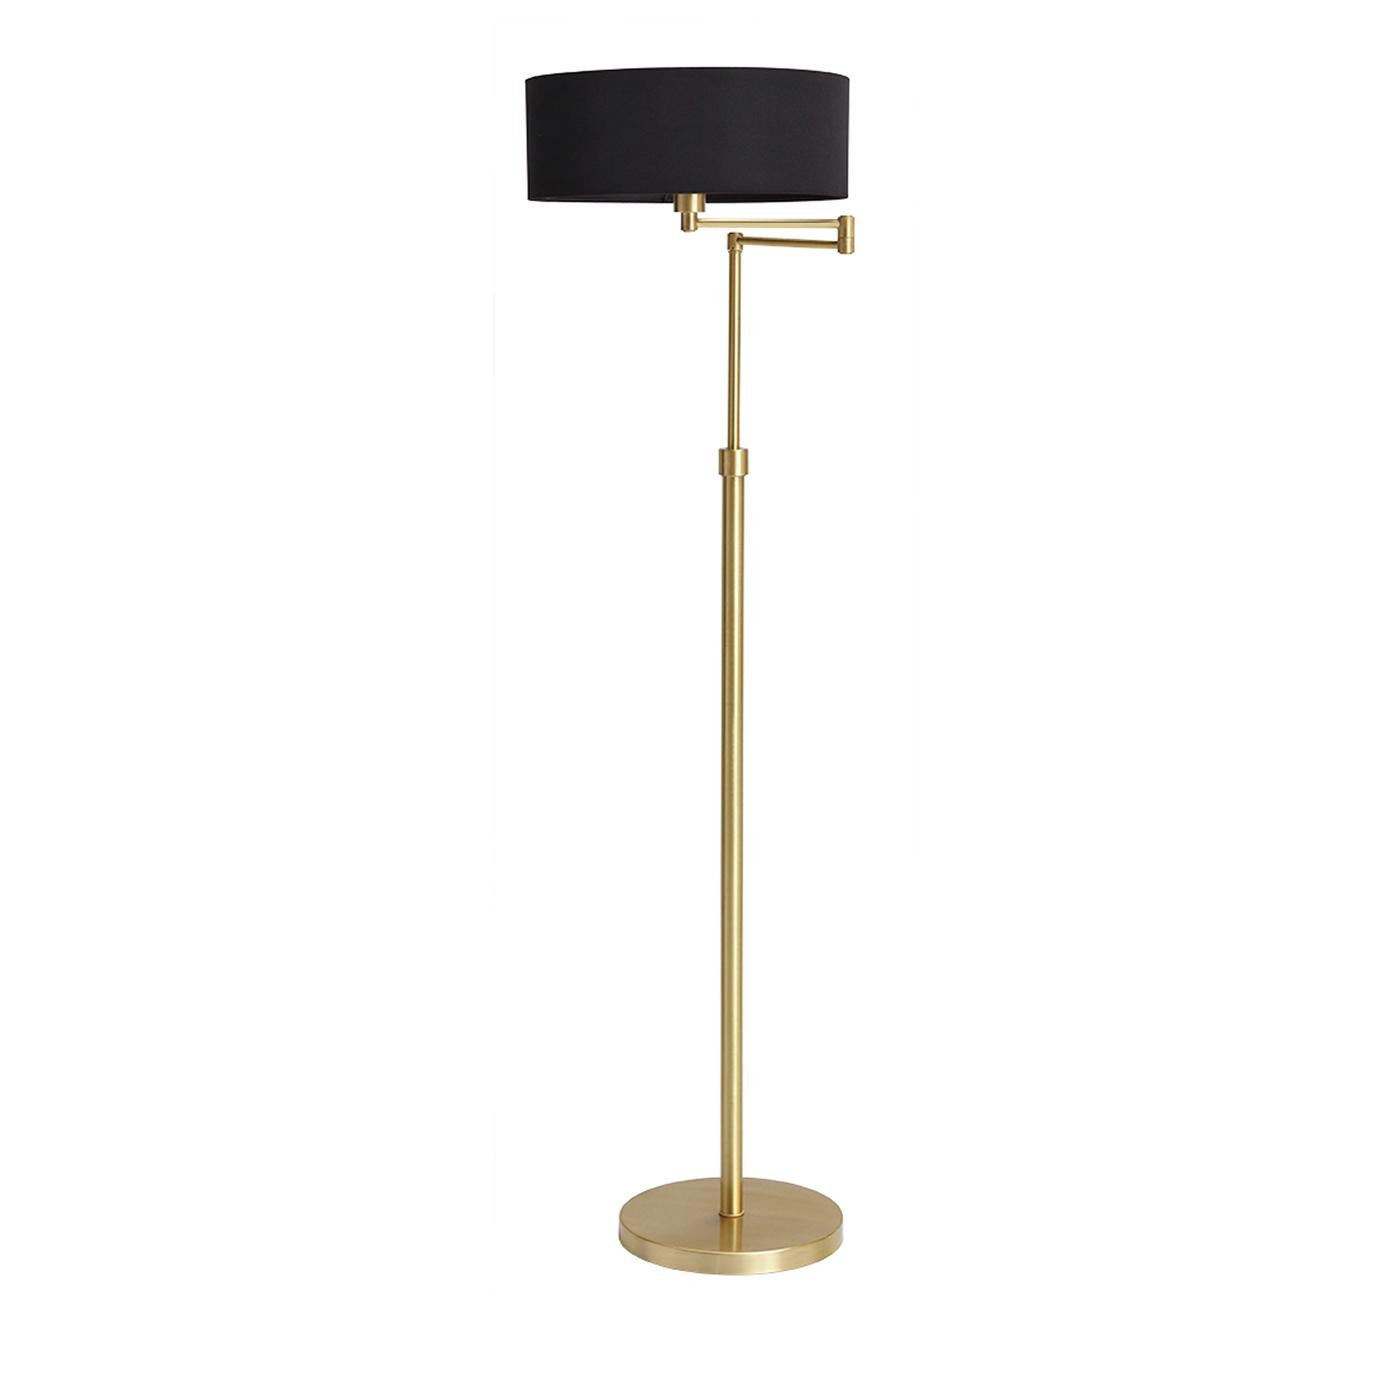 A timeless floor lamp for a chic, contemporary living room. The queen floor lamp stands on a simple brass base with a satin finish. With two hinges and an adjustable height, the lamp is perfect for reading the evening paper or relaxing with a good